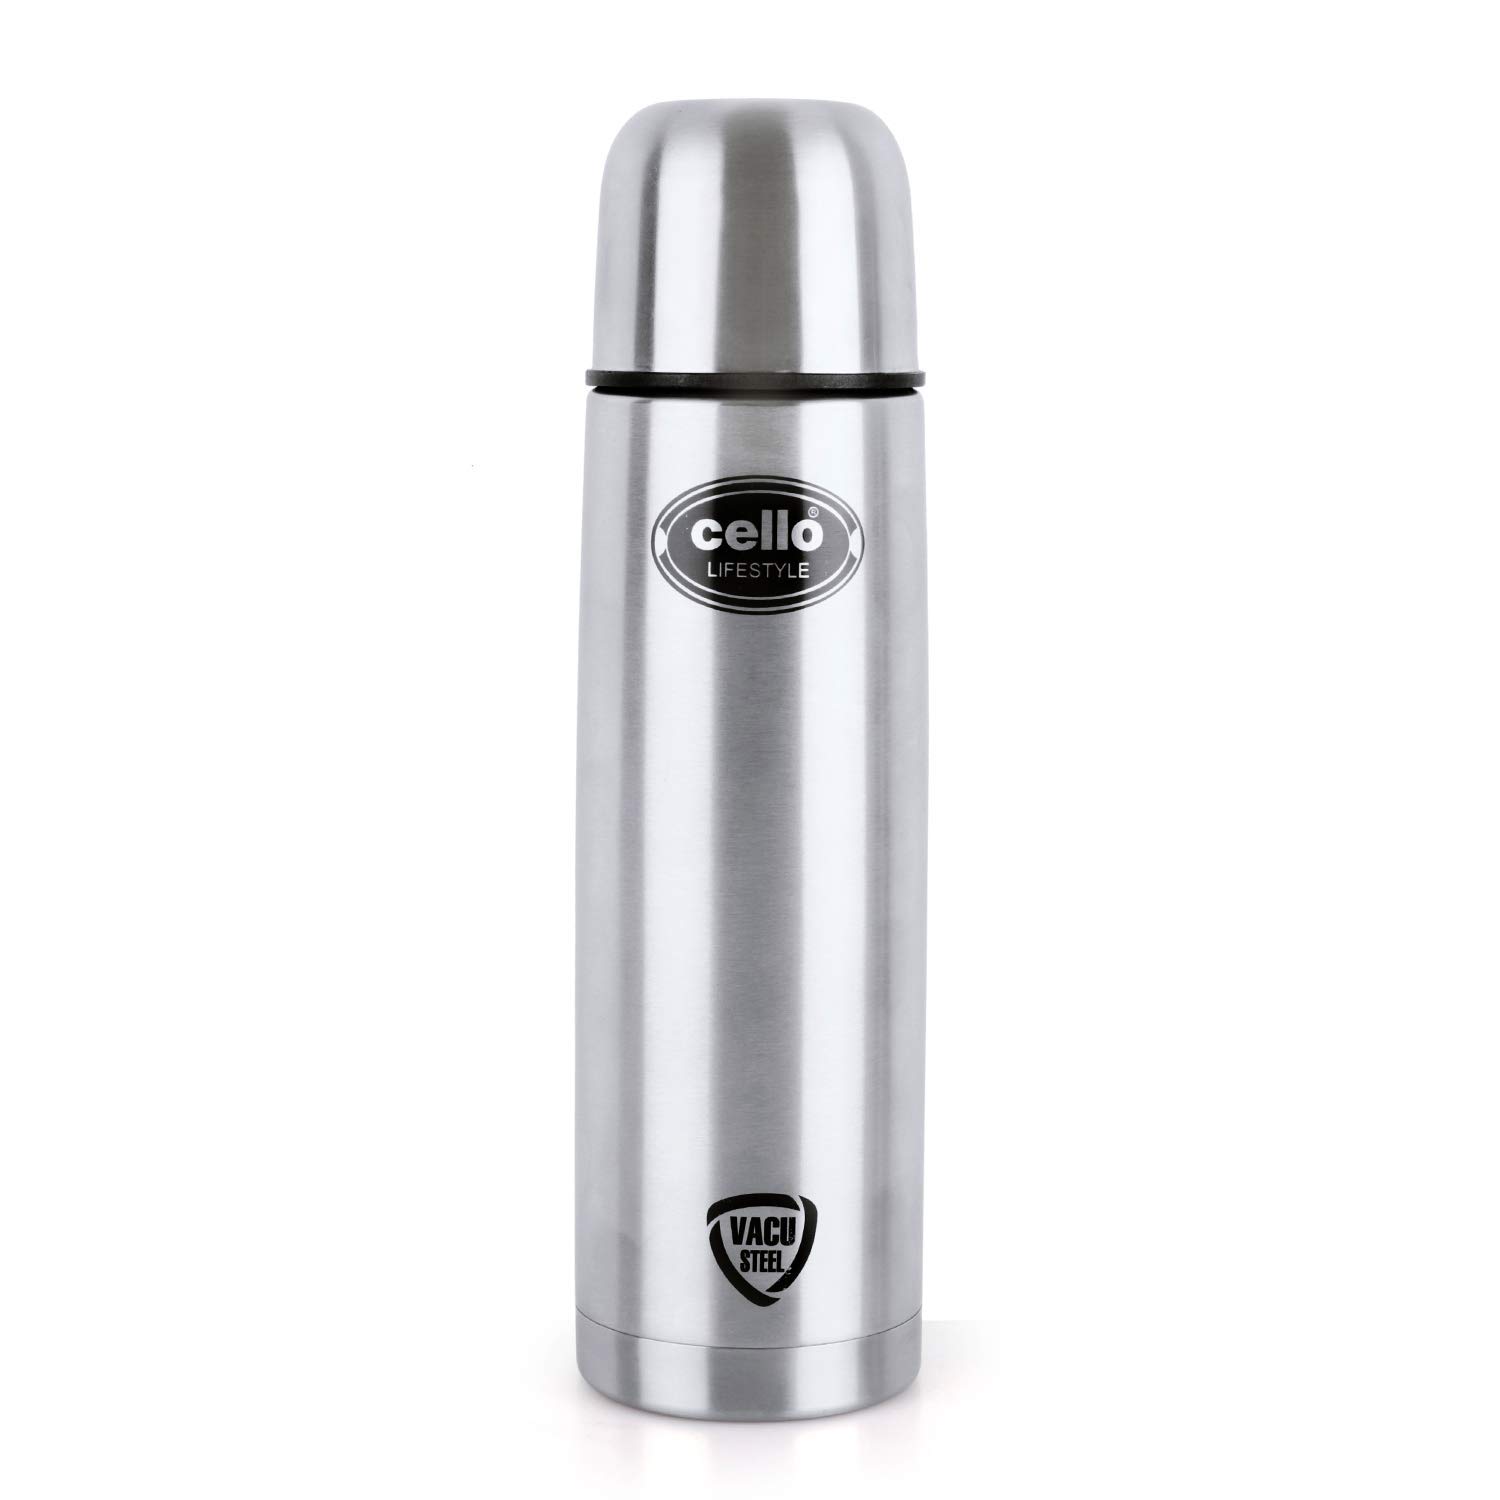 Cello lifestyle stainless steel insulated flask 